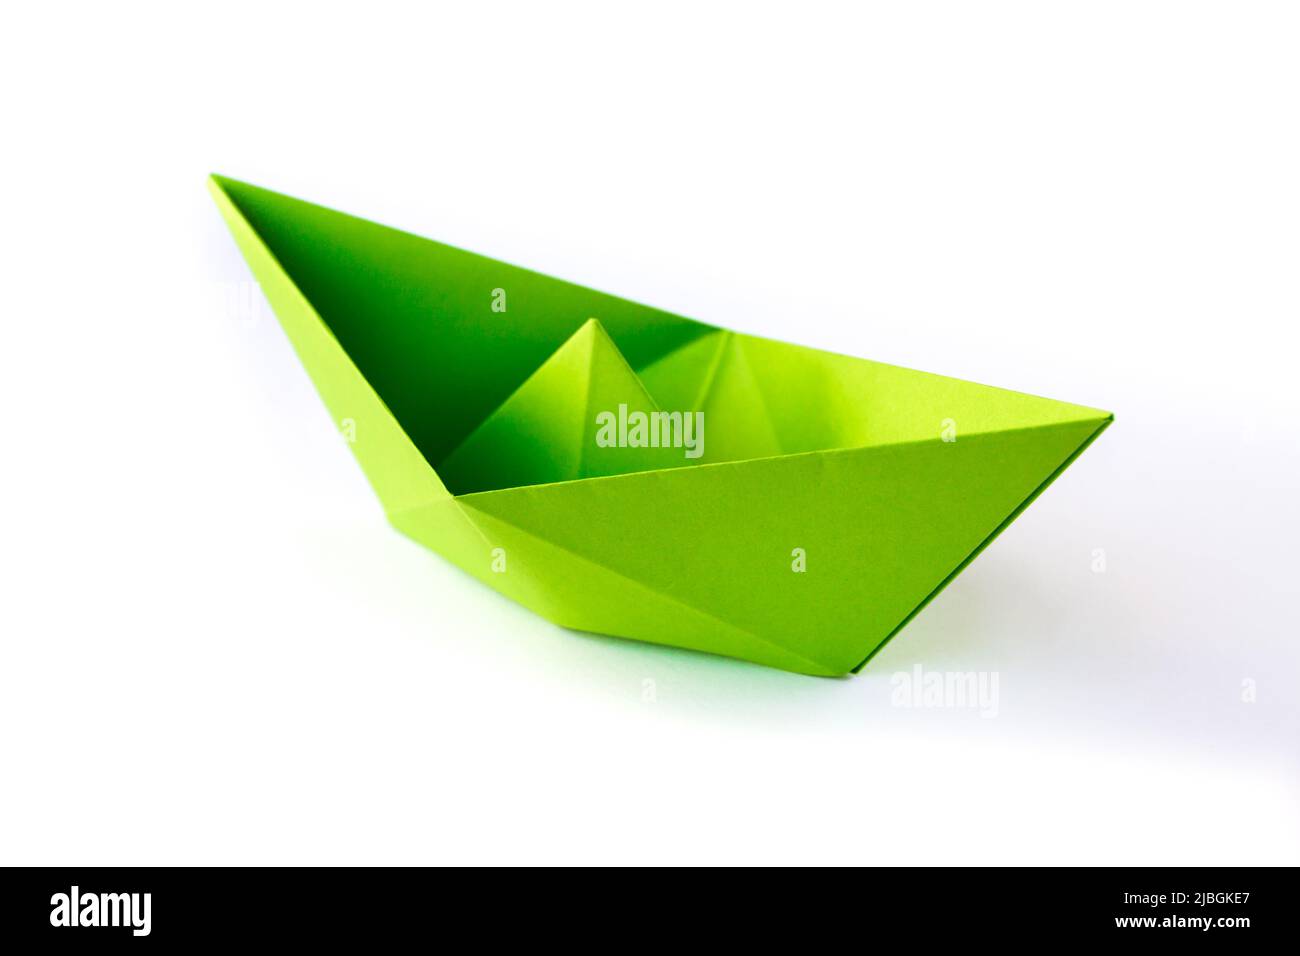 Green paper boat origami isolated on a blank white background. Stock Photo